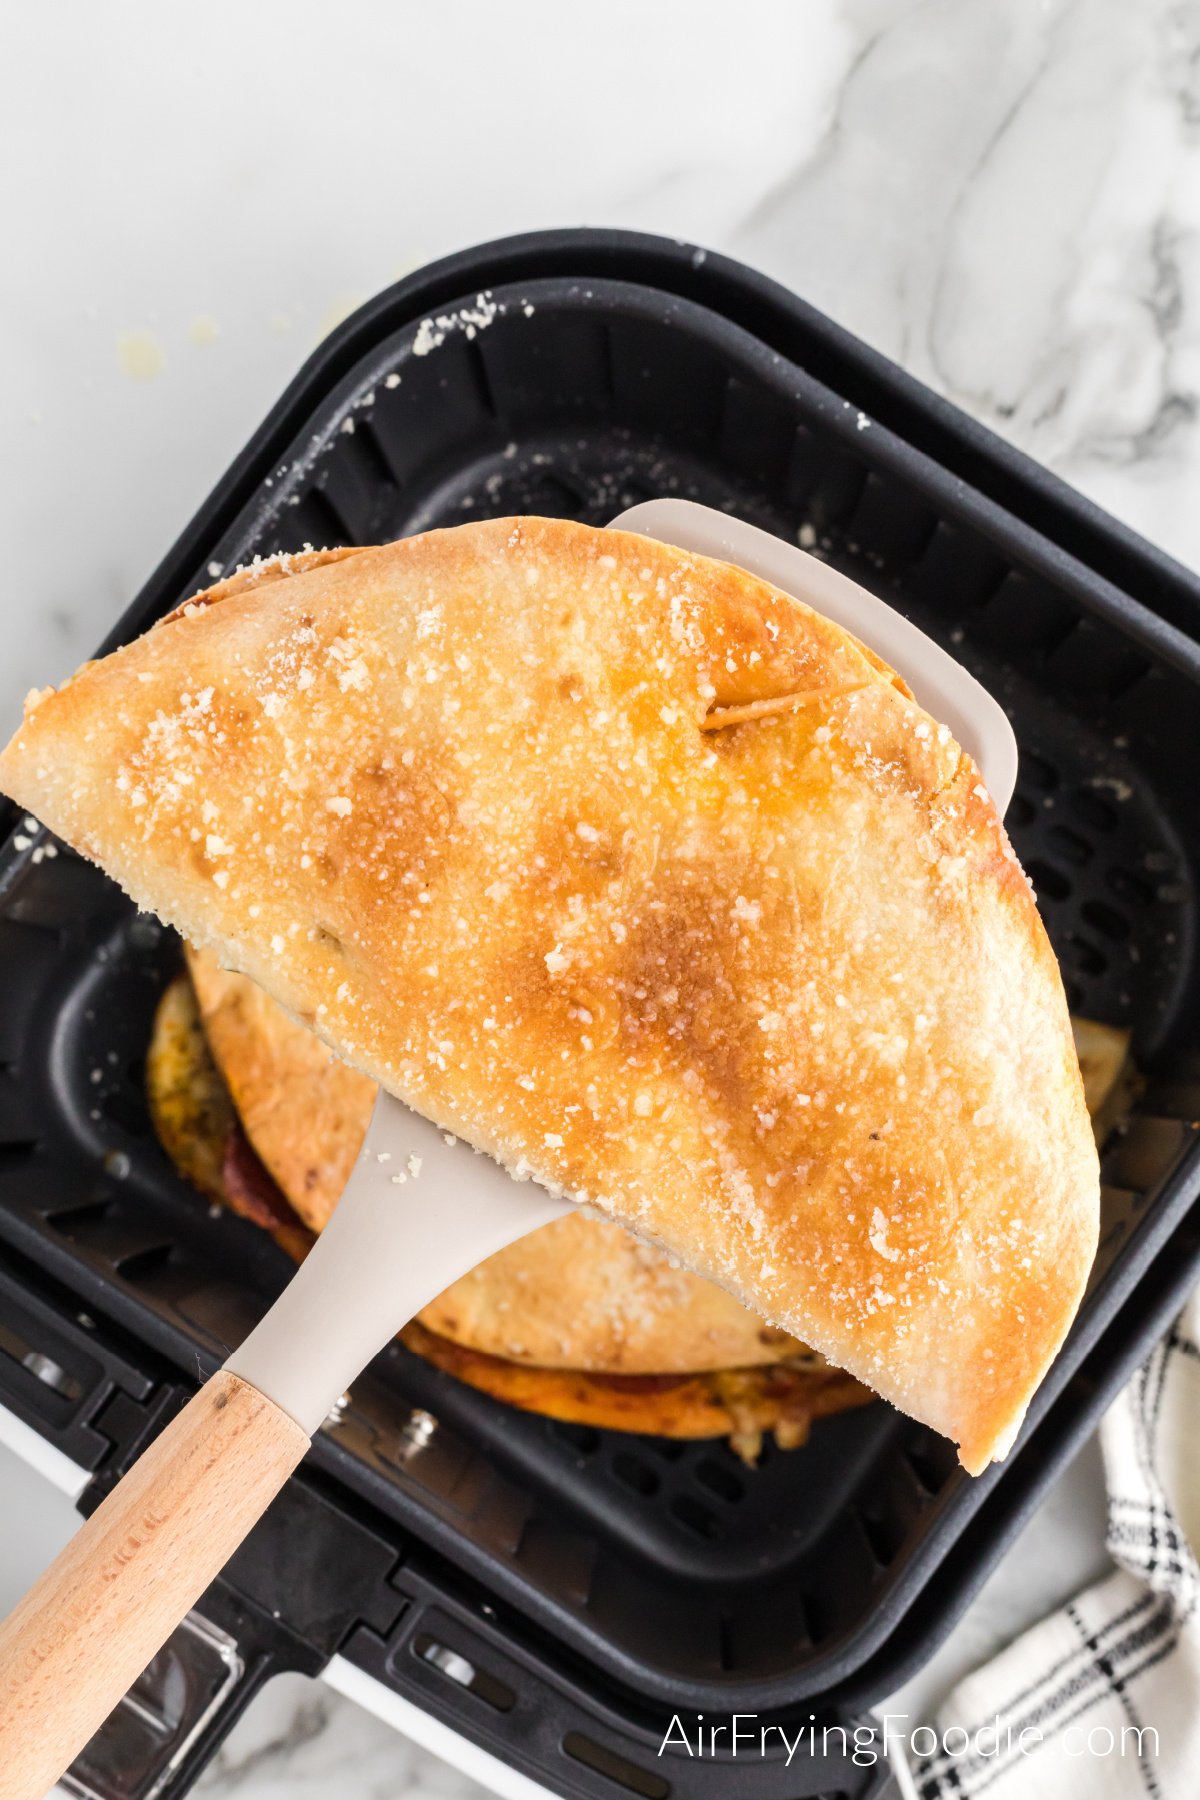 Pizza quesadilla on a spatula being removed from the air fryer.